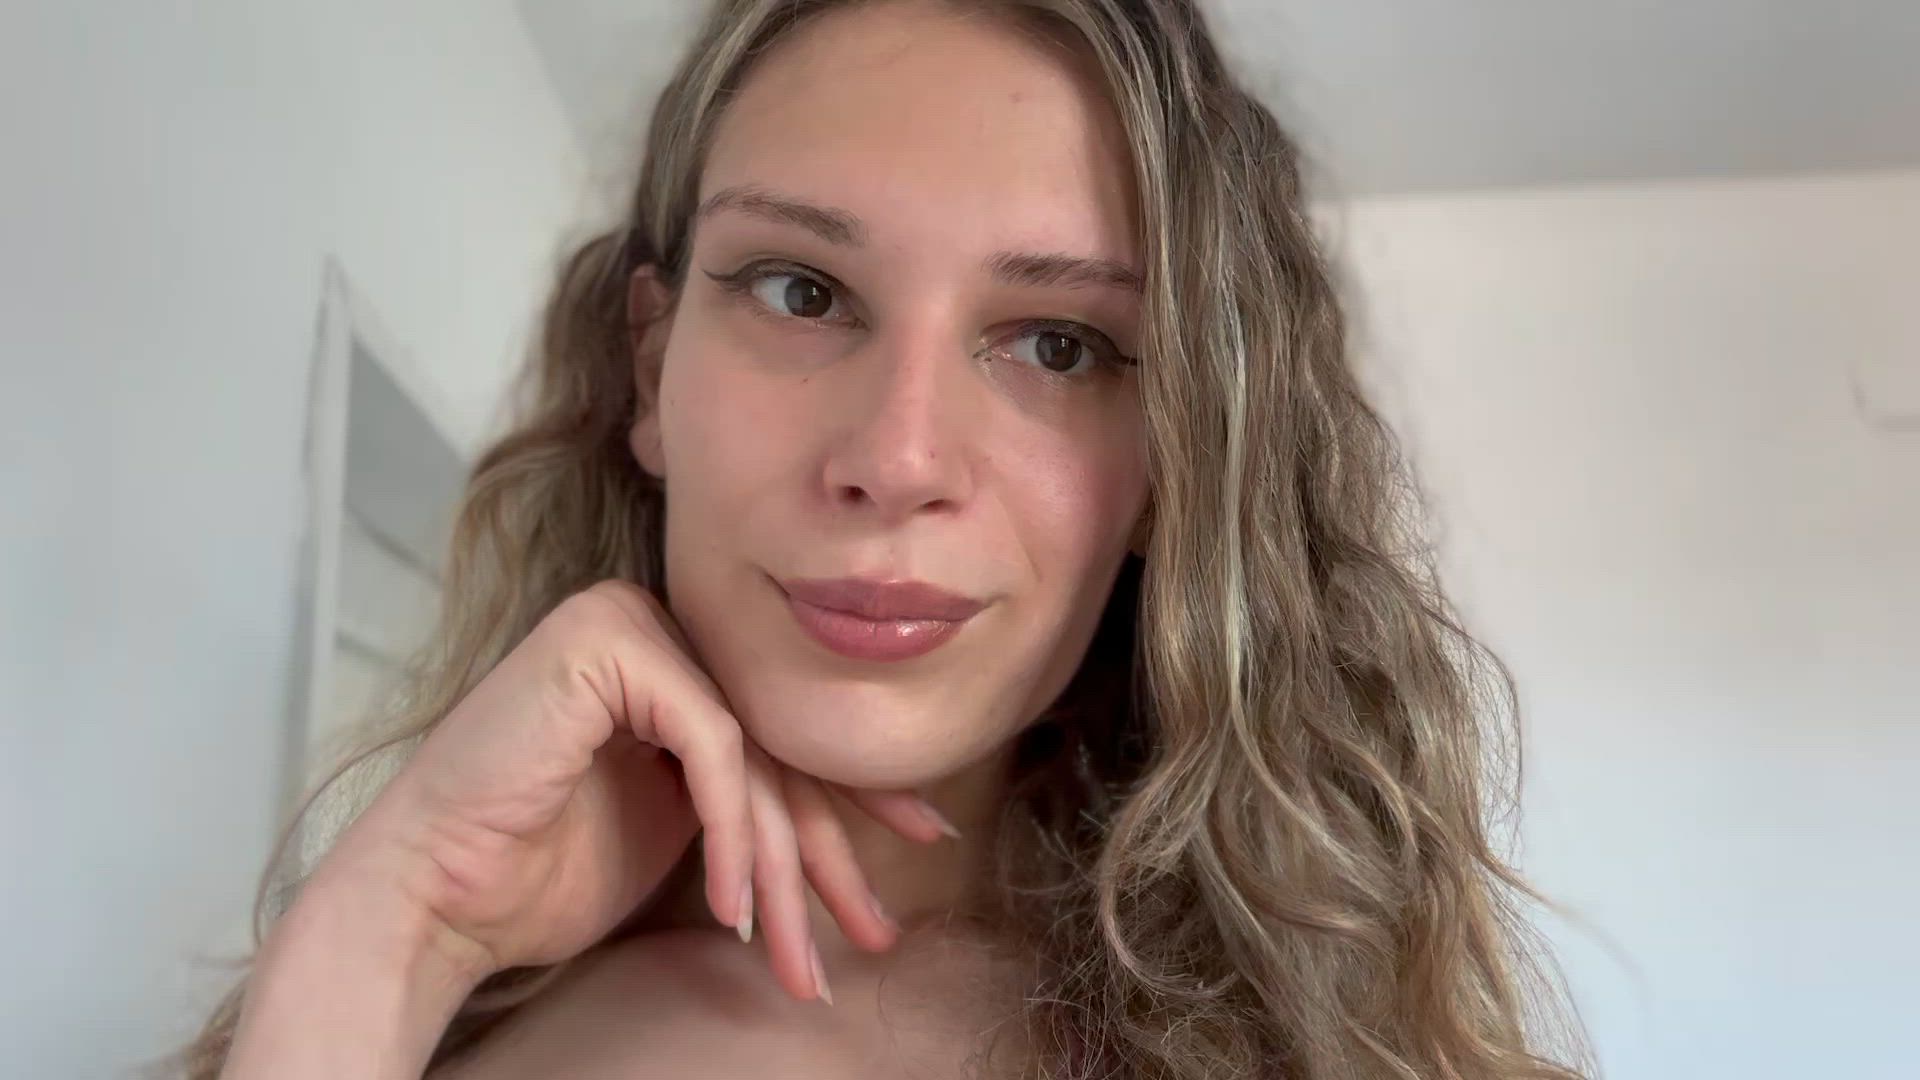 Amateur porn video with onlyfans model whatrayadidnext <strong>@transenchantress</strong>